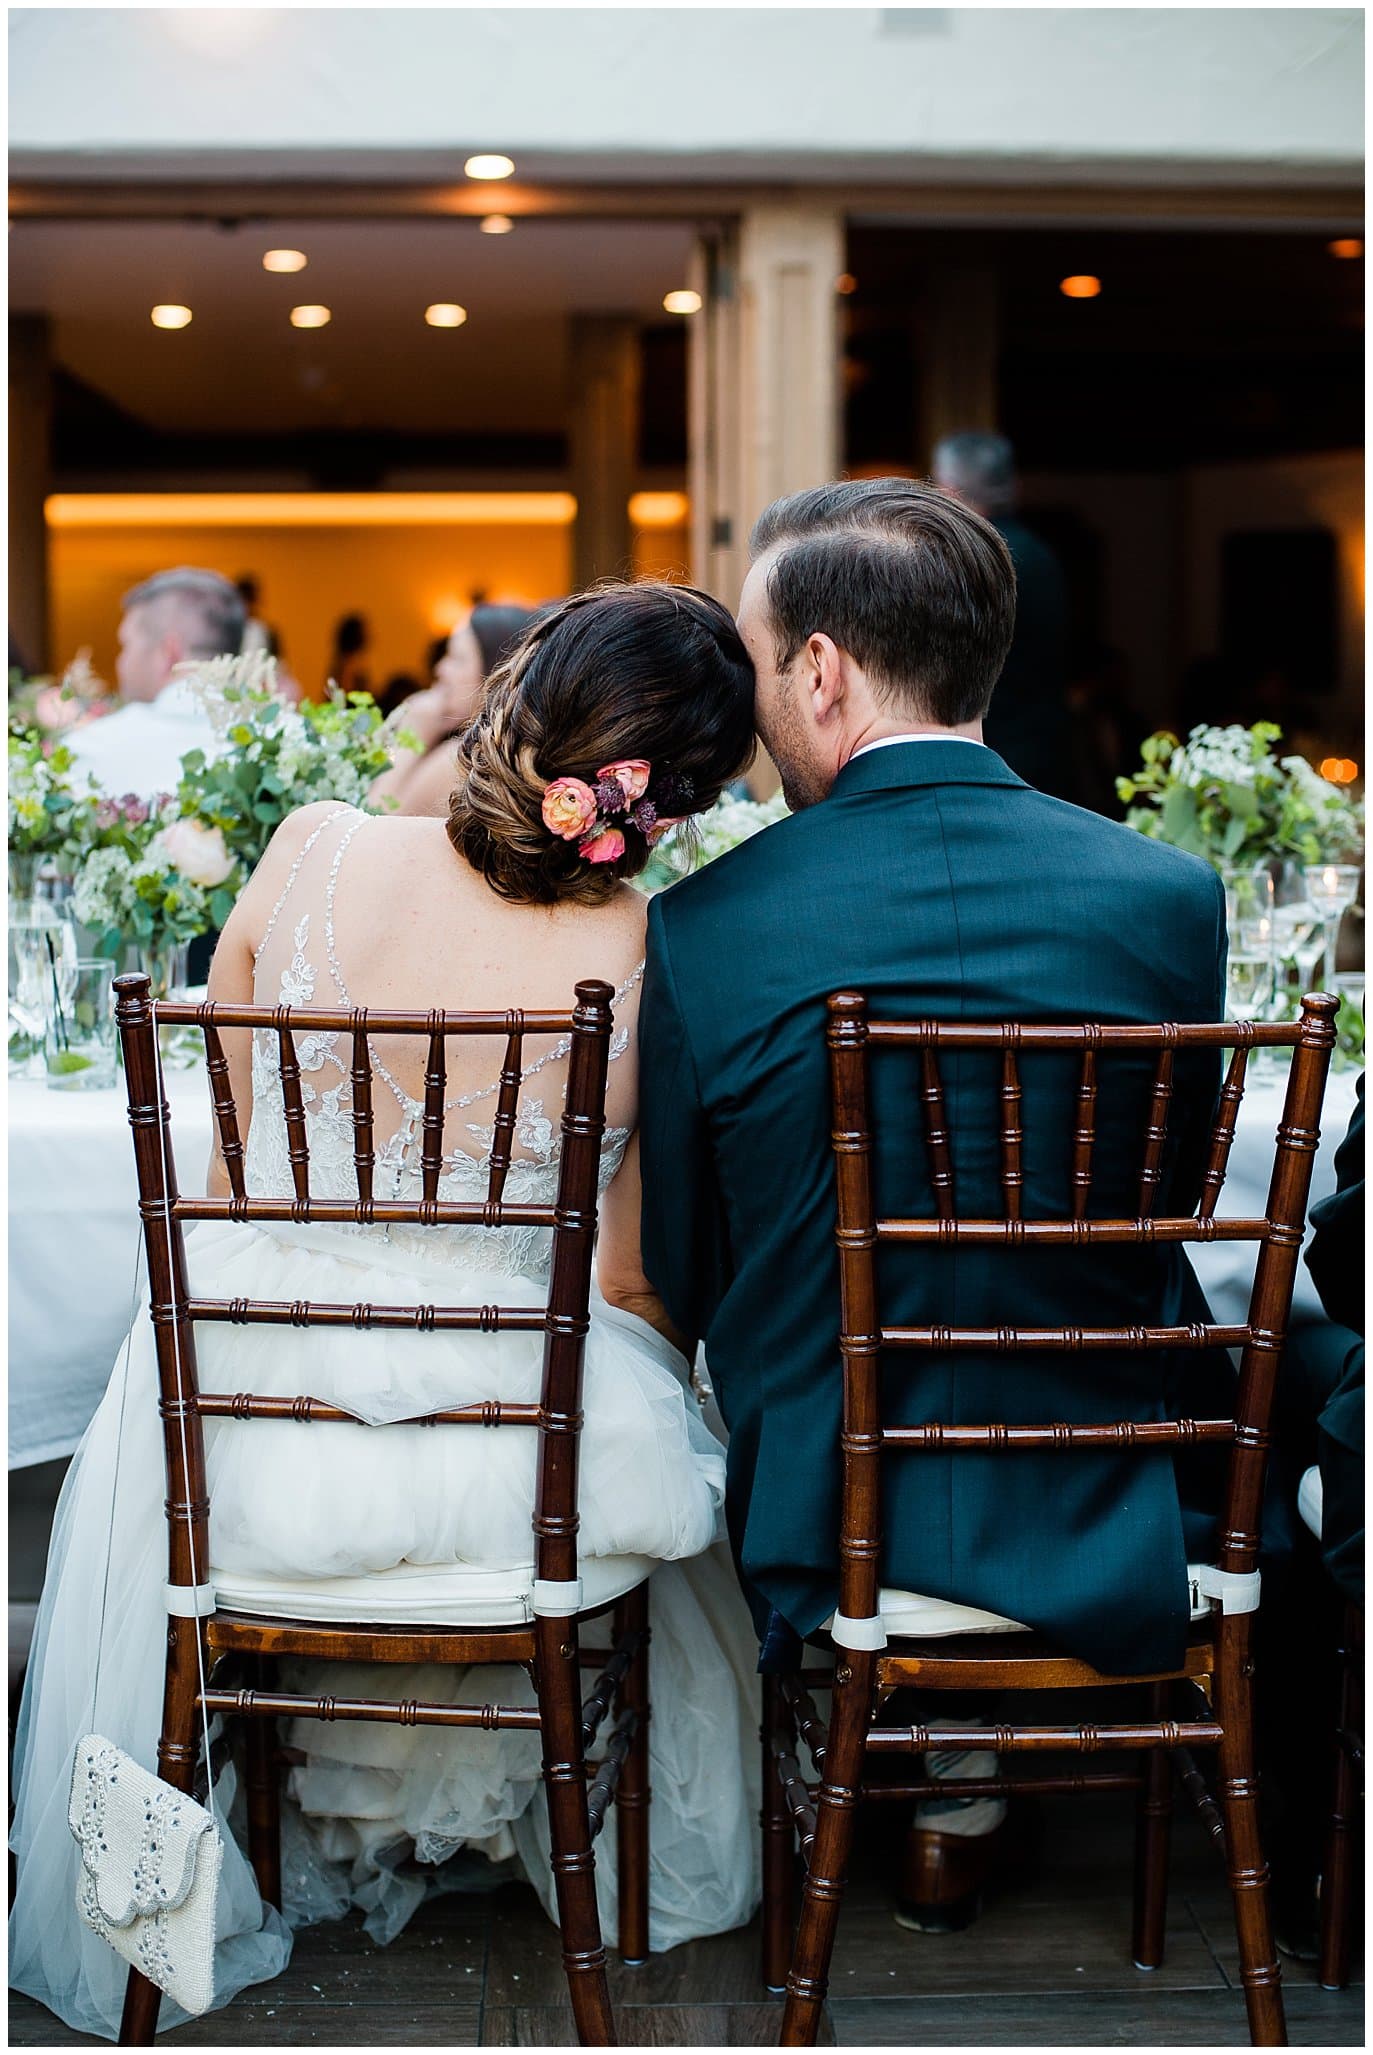 Colorful and antique styled at Sonnenalp Hotel Vail Colorado Wedding by Vail Wedding Photographer Jennie Crate